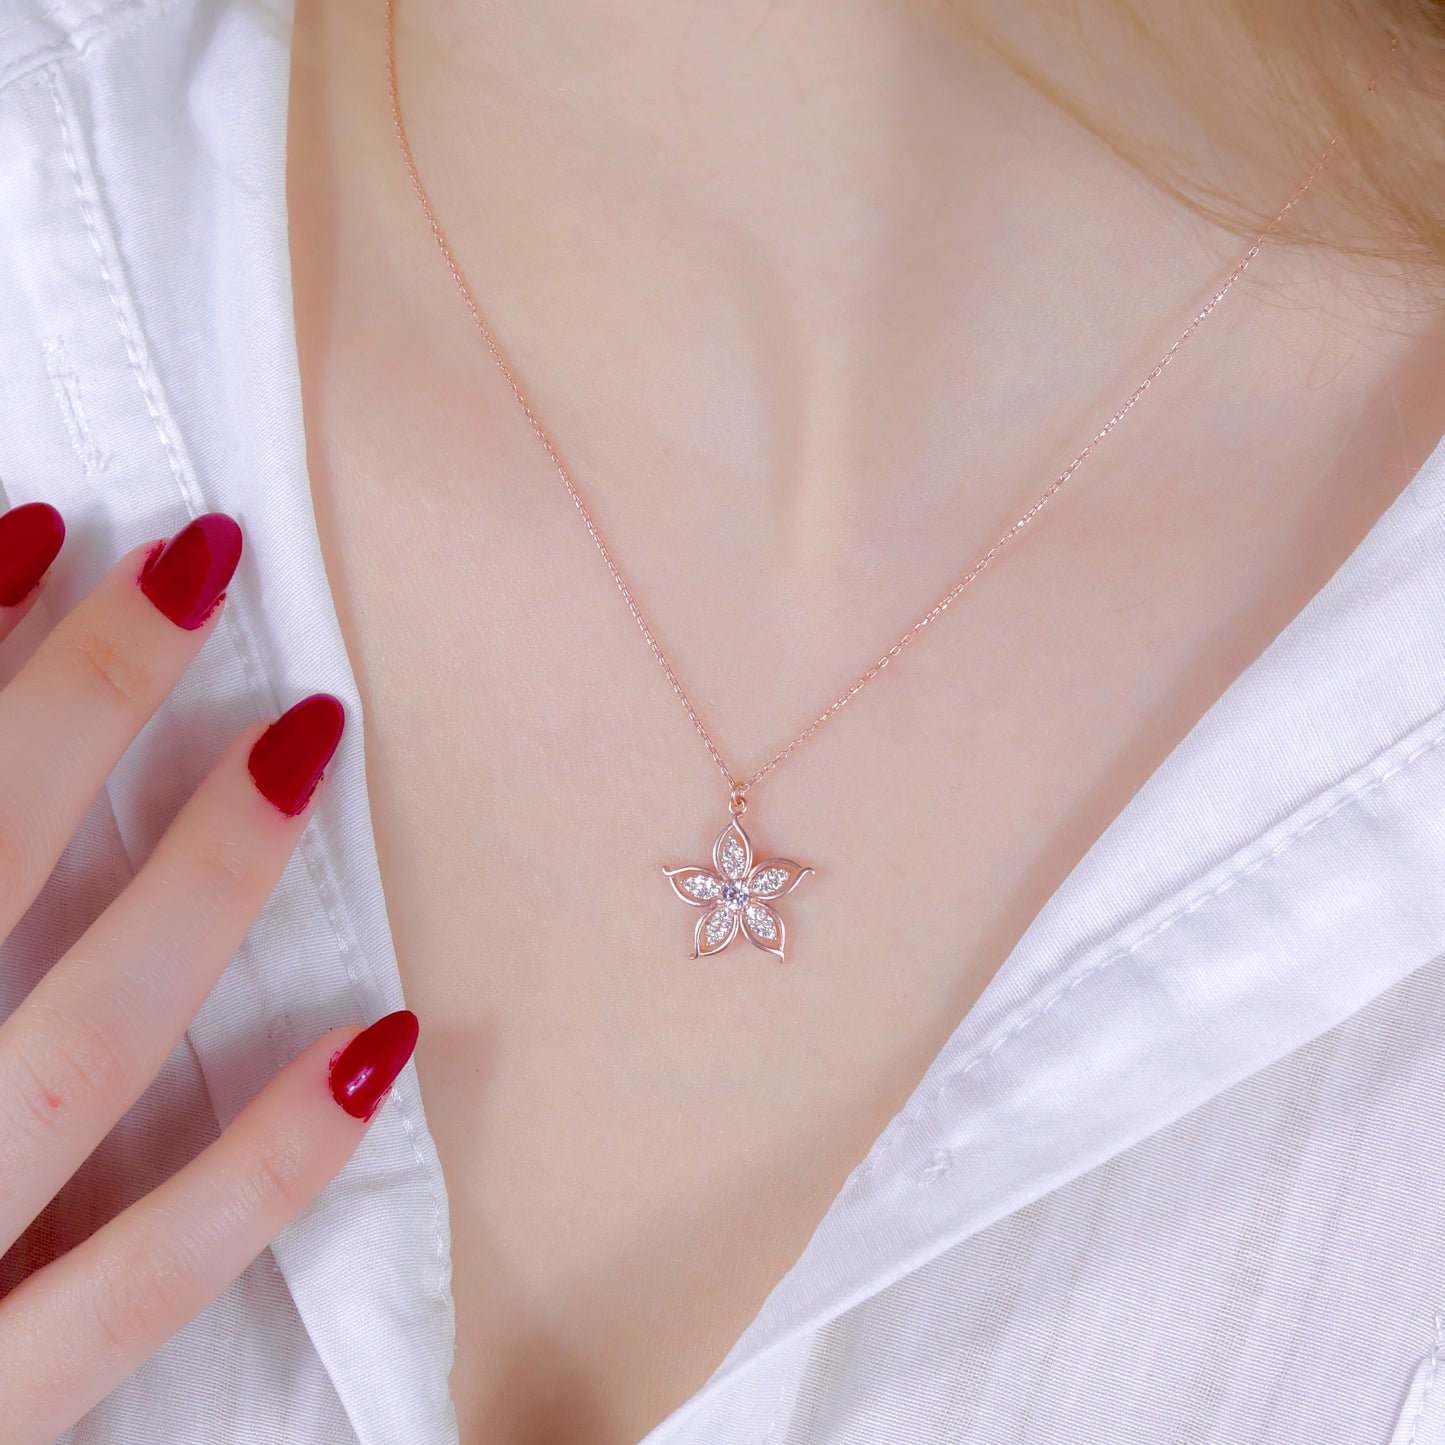 Star Necklace with 925 Sterling Silver Zircon Stone